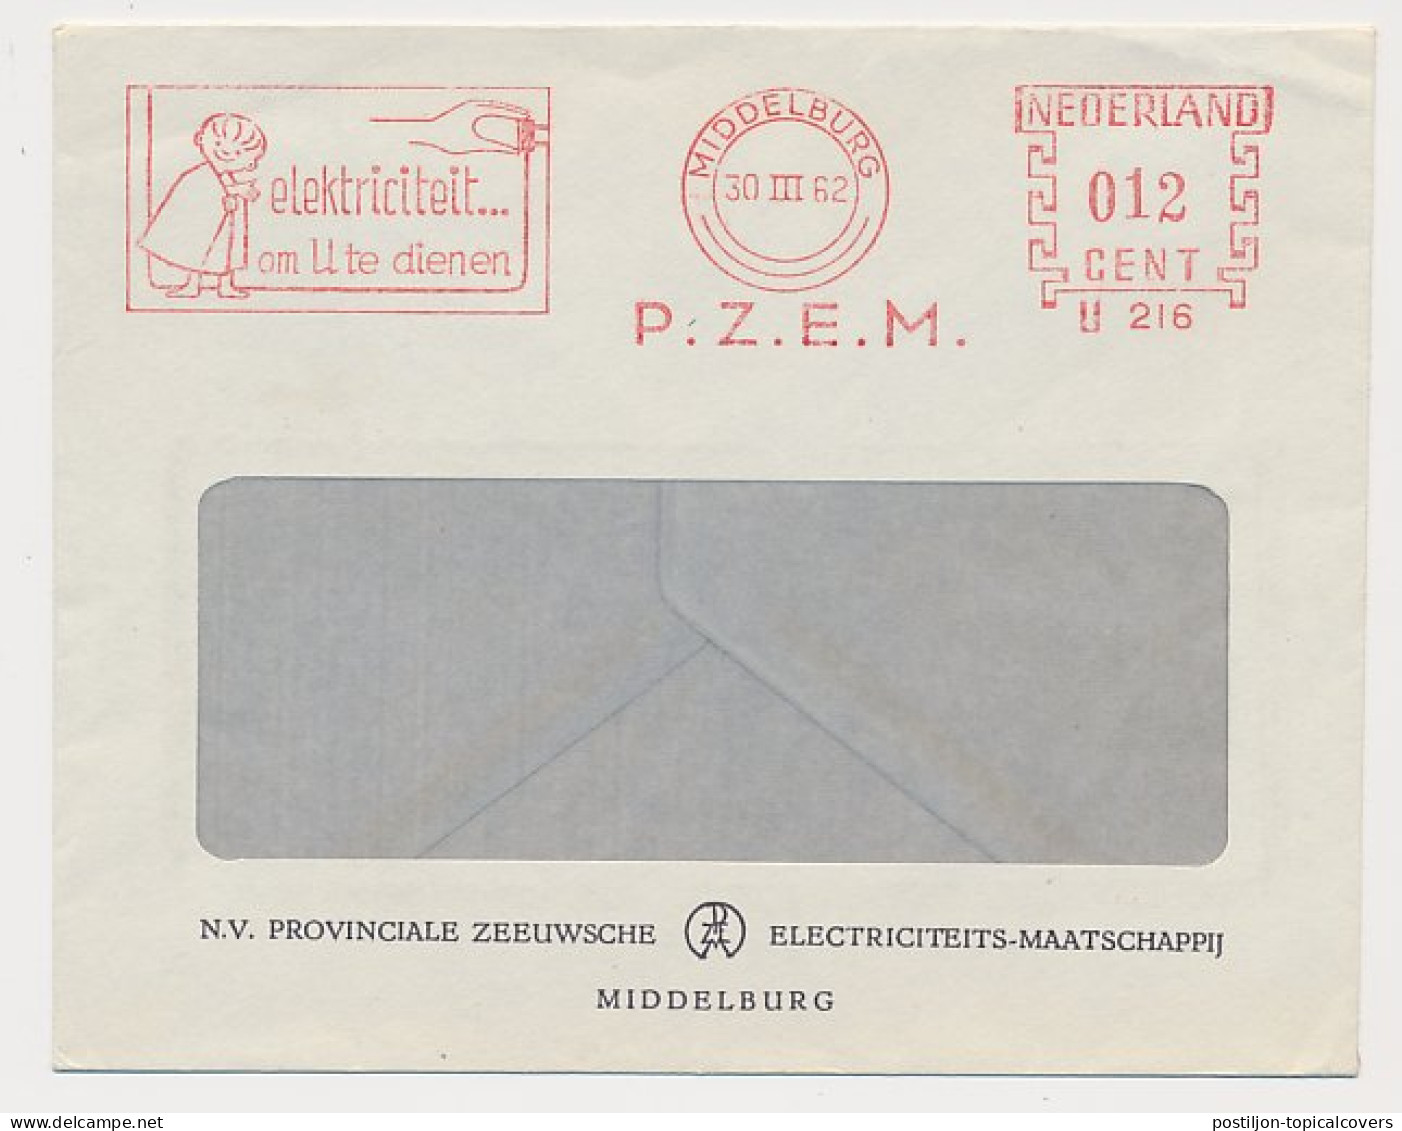 Meter Cover Netherlands 1962 Electricity ... To Serve You - Middelburg - Electricity